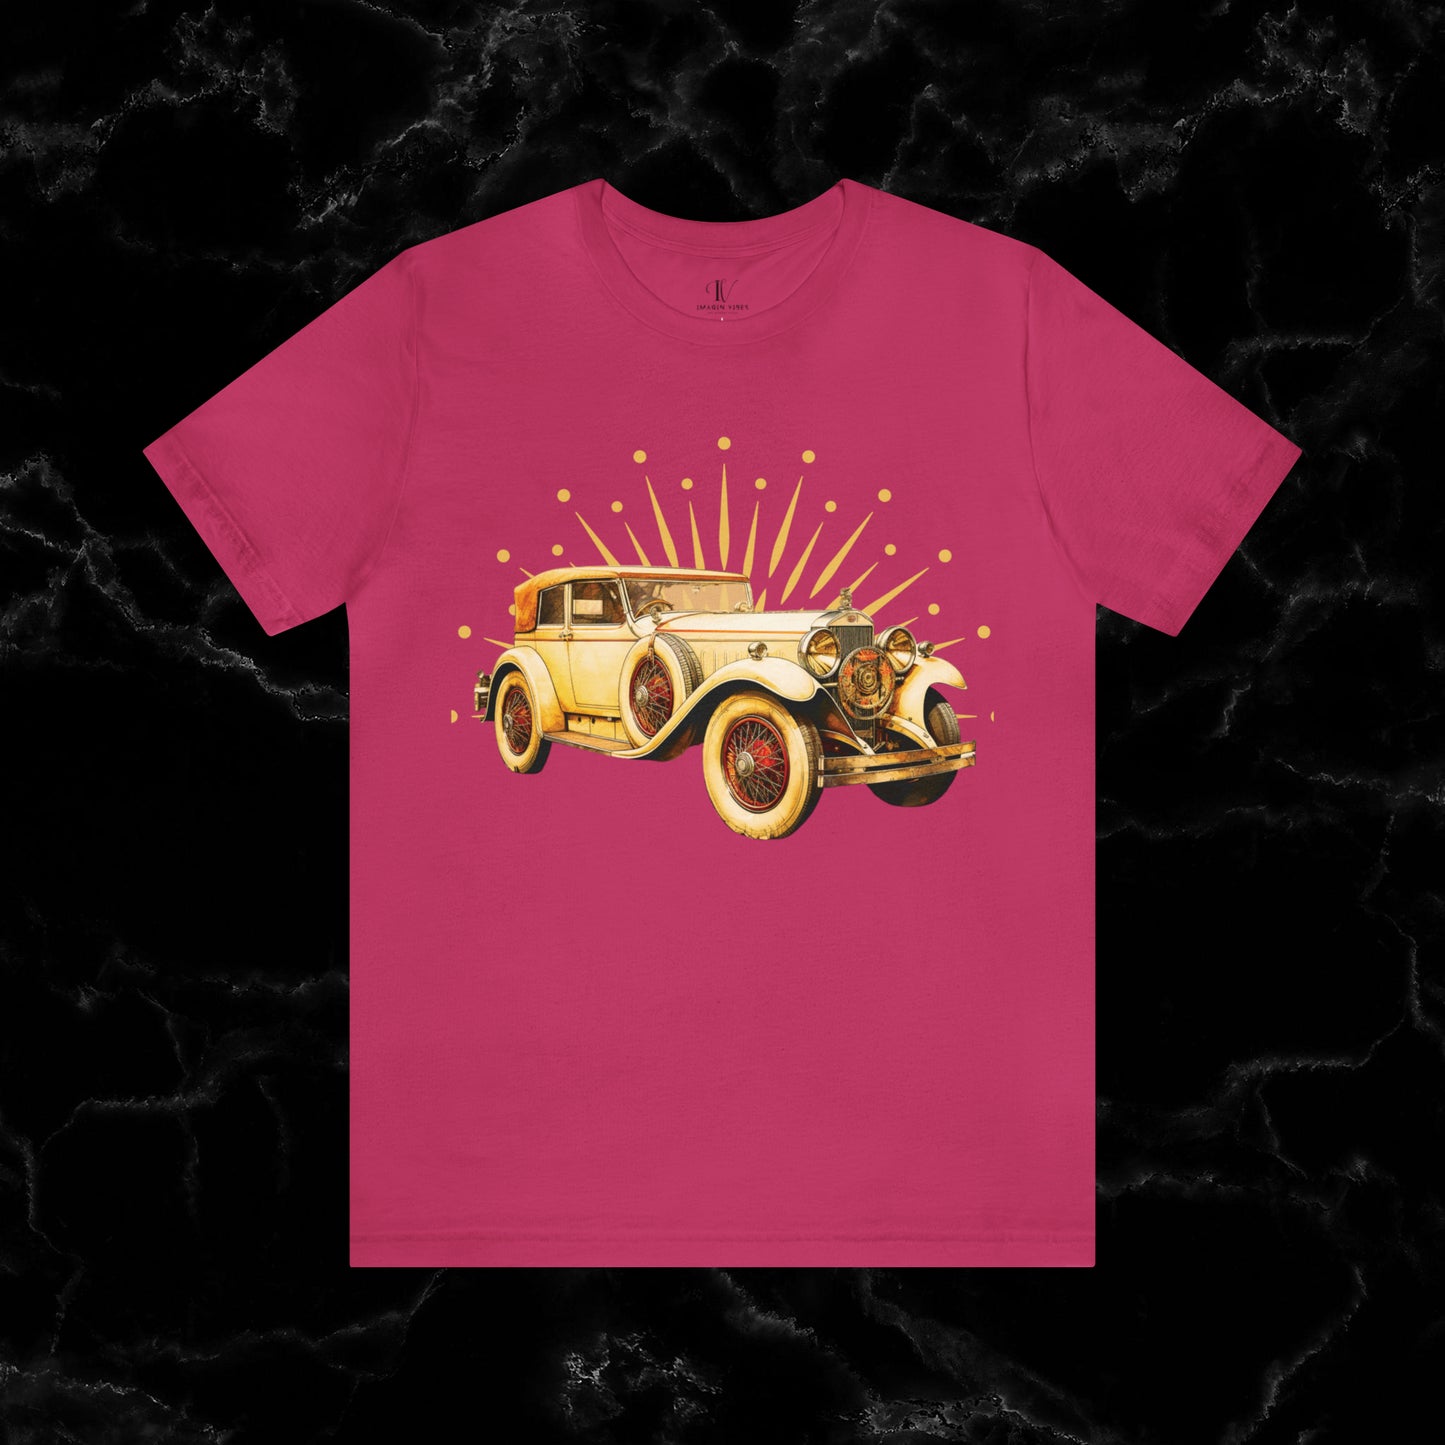 Vintage Car Enthusiast T-Shirt with Classic Wheels and Timeless Appeal T-Shirt Berry S 